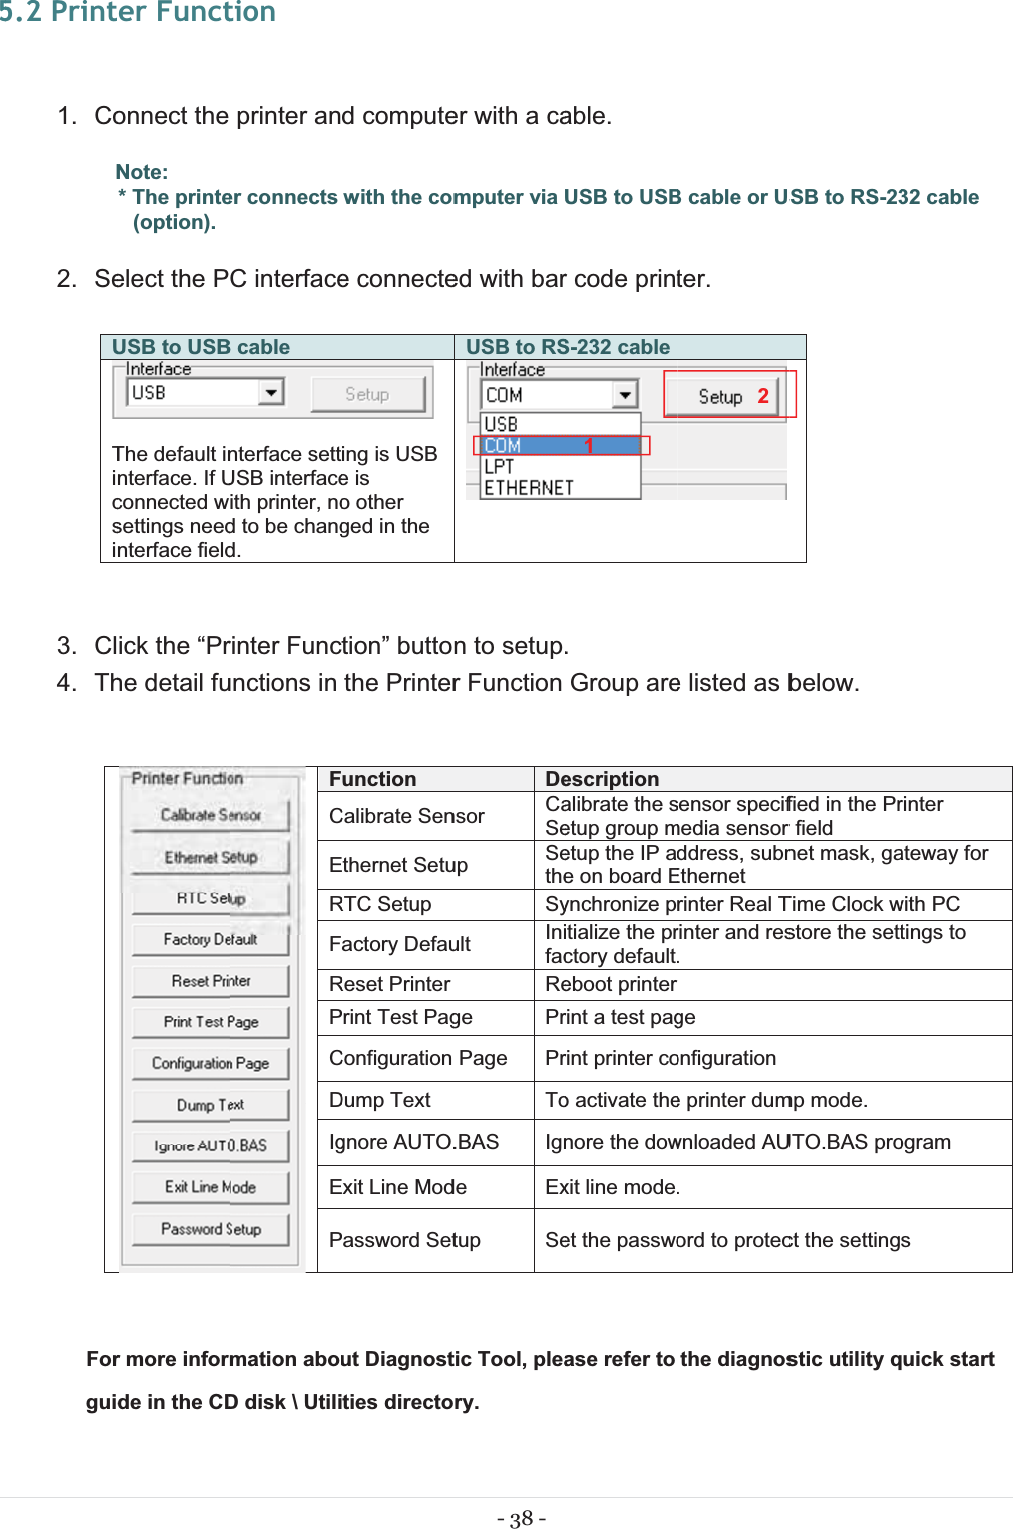 5 5.2 Print 1. CoN2. SeU Ticsi 3. Cl4. Th Forguider Functonnect the Note:* The printe(option). elect the PUSB to USBThe default innterface. If Uconnected wsettings neednterface fieldick the “Prhe detail fur more inforde in the CDtionprinter aner connects C interfaceB cablenterface settUSB interfaceith printer, nod to be changd. rinter Funcunctions in  FCERFRPCDIgEPmation abouD disk \ Utilid computewith the come connecte ing is USB e is o other ged in the tion” buttothe Printerunction Calibrate Senthernet SetuRTC Setup actory DefauReset Printerrint Test PagConfiguration Dump Text gnore AUTO.xit Line Modassword Setut Diagnostties directo- 38 - er with a camputer via Ued with barUSB to RSn to setup.r Function Densor  CaSeup  SetheSyult  InifacRege PrPage PrTo.BAS Ignde Extup Setic Tool, pleary.able. USB to USBr code printS-232 cable. Group areescriptionalibrate the setup group metup the IP ae on board Eynchronize ptialize the prctory defaulteboot printerrint a test pagrint printer coo activate thenore the dowxit line modeet the passwoase refer to1B cable or USter.  e listed as bensor specifmedia sensor ddress, subnEthernet rinter Real Trinter and res. ge onfiguration e printer dumwnloaded AU. ord to protecthe diagnos2SB to RS-23below. fied in the Prr field net mask, gaTime Clock wstore the settmp mode. UTO.BAS proct the settingstic utility q32 cable rinter ateway for with PC tings to ogram s uick start 